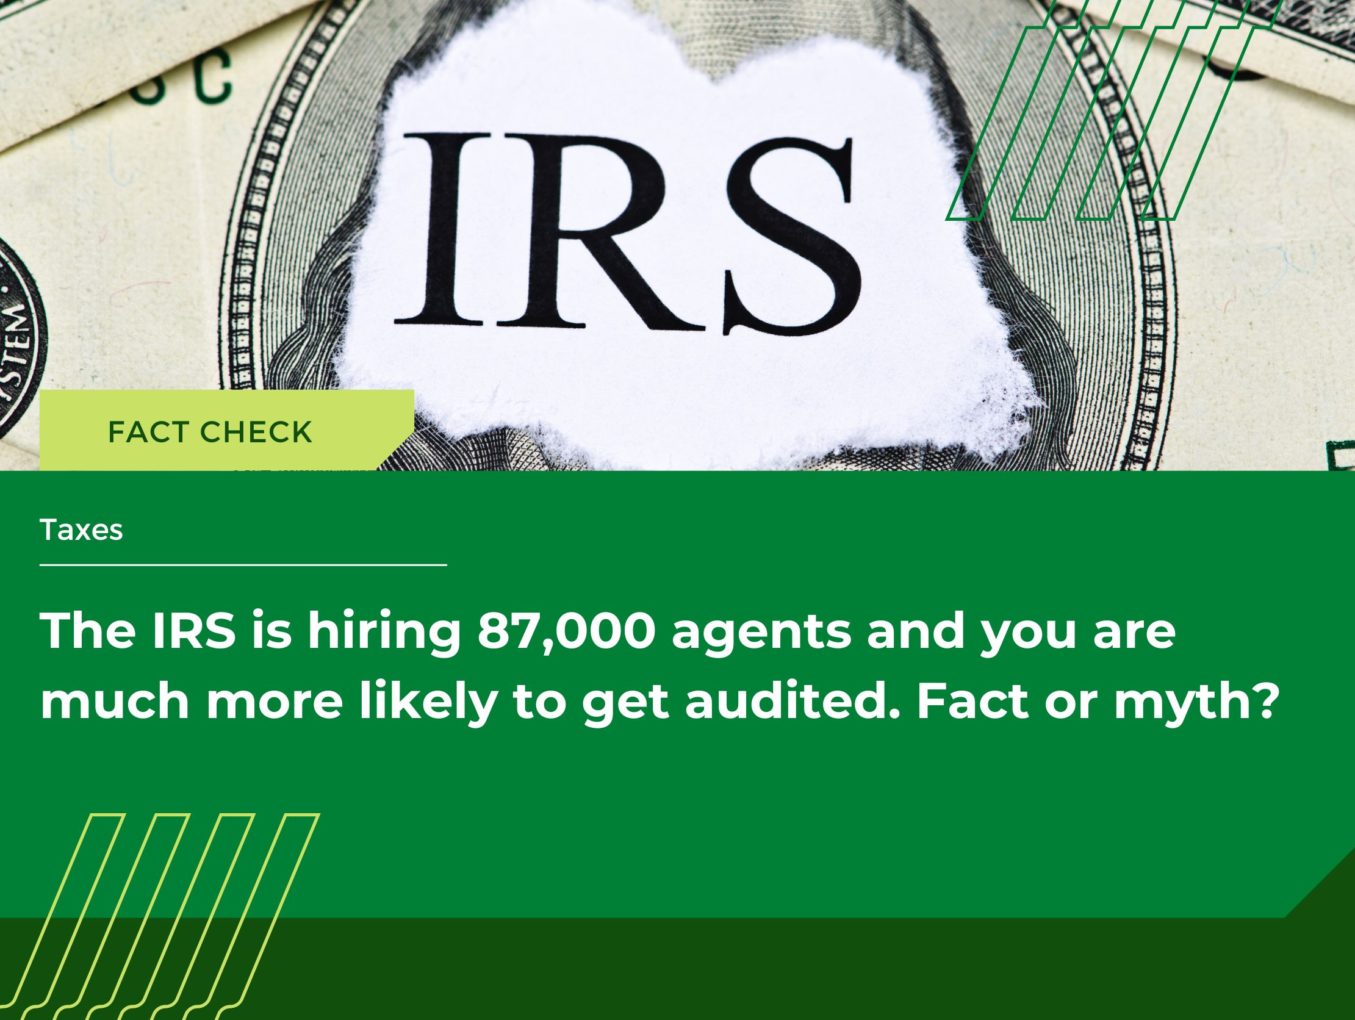 Does More IRS Funding Mean You’re More Likely to Be Audited?